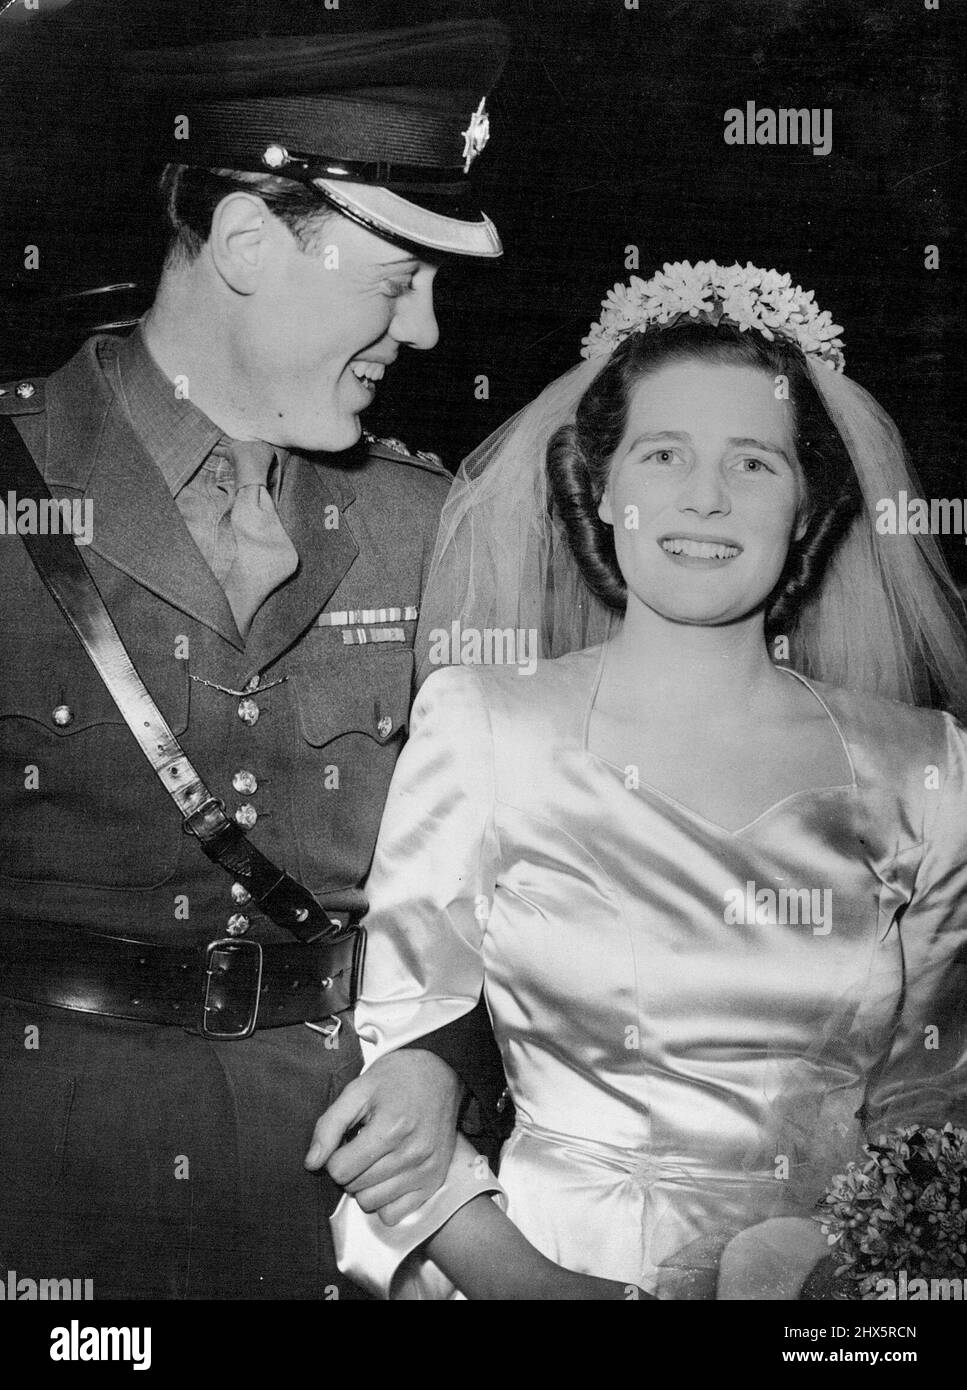 Miss Mary Churchill weds captain Christopher Soames at St. Margaret's Church, Westminster, in London. The bride and bridegroom arriving at the Dorchester Hotel, in London, for the wedding reception, after the ceremony at St. Margaret's Church, Westminster. Mr. Winston Churchill, Britain's war-time Leader, led his youngest daughter Miss Mary Churchill, to the altar at St. Margaret's Church, Westminster, London, when she was married to Captain Christopher Soames of the Coldstream Guards, the only son of Captain Arthur Granville Soames, and the Hon. Mrs. Charles Rhys. February 11, 1947. Stock Photo